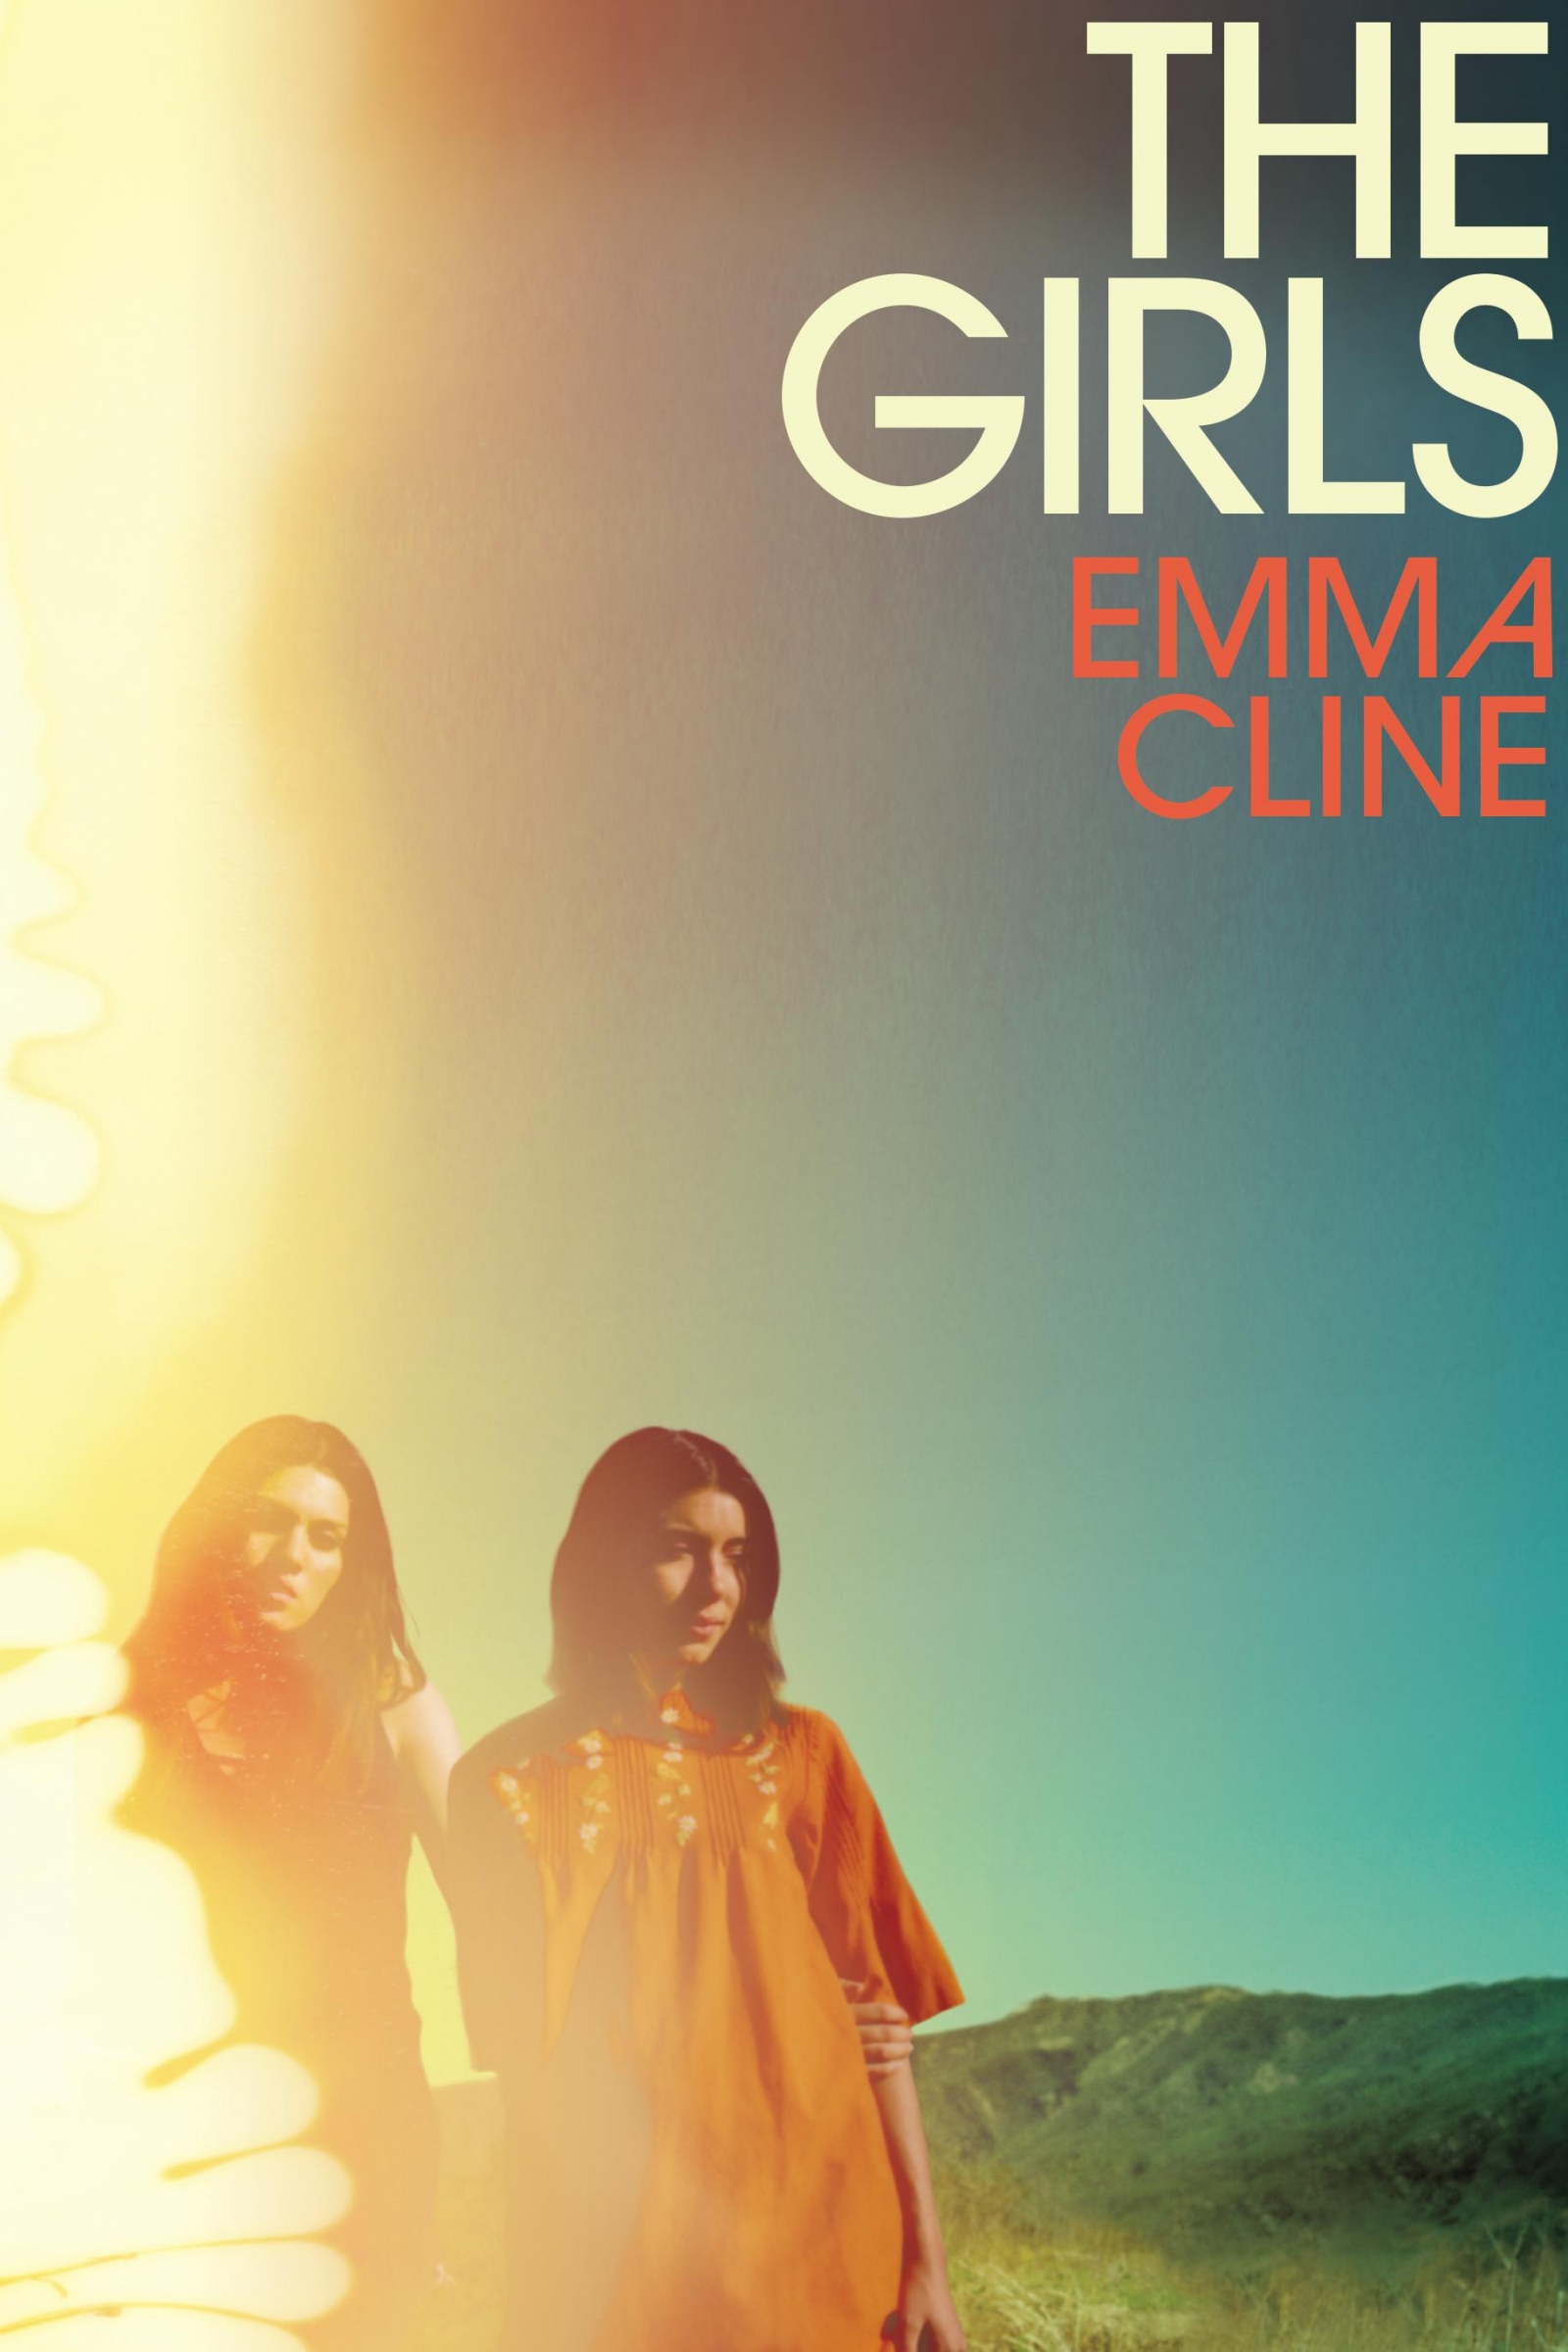 The Girls by Emma Cline: A compelling reimagining of the infamous